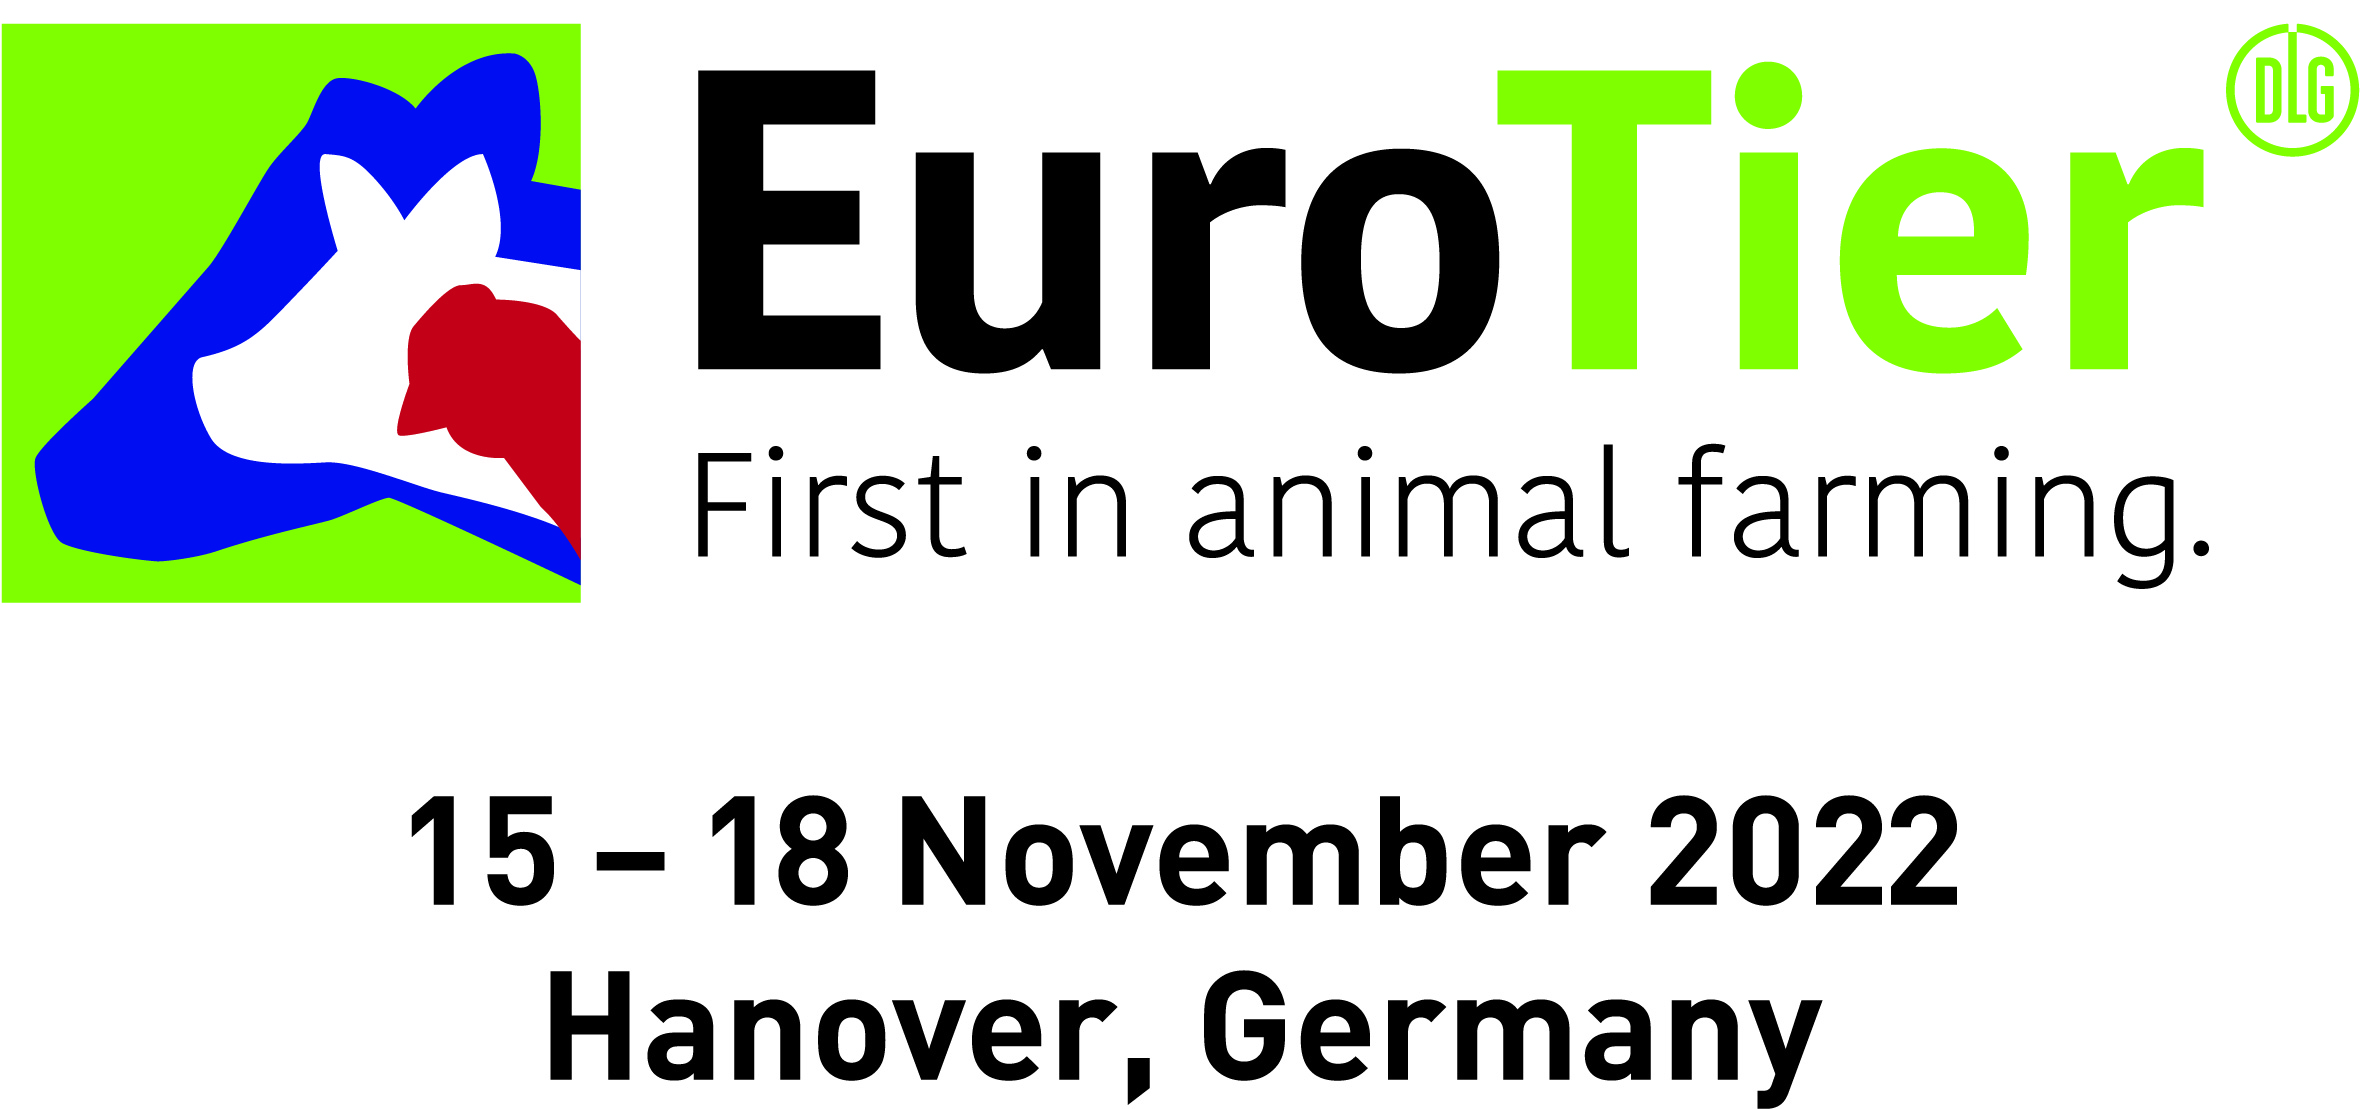 EUROTIER 2022 - INNOVATIONS FOR THE GLOBAL ANIMAL HOUSING INDUSTRY